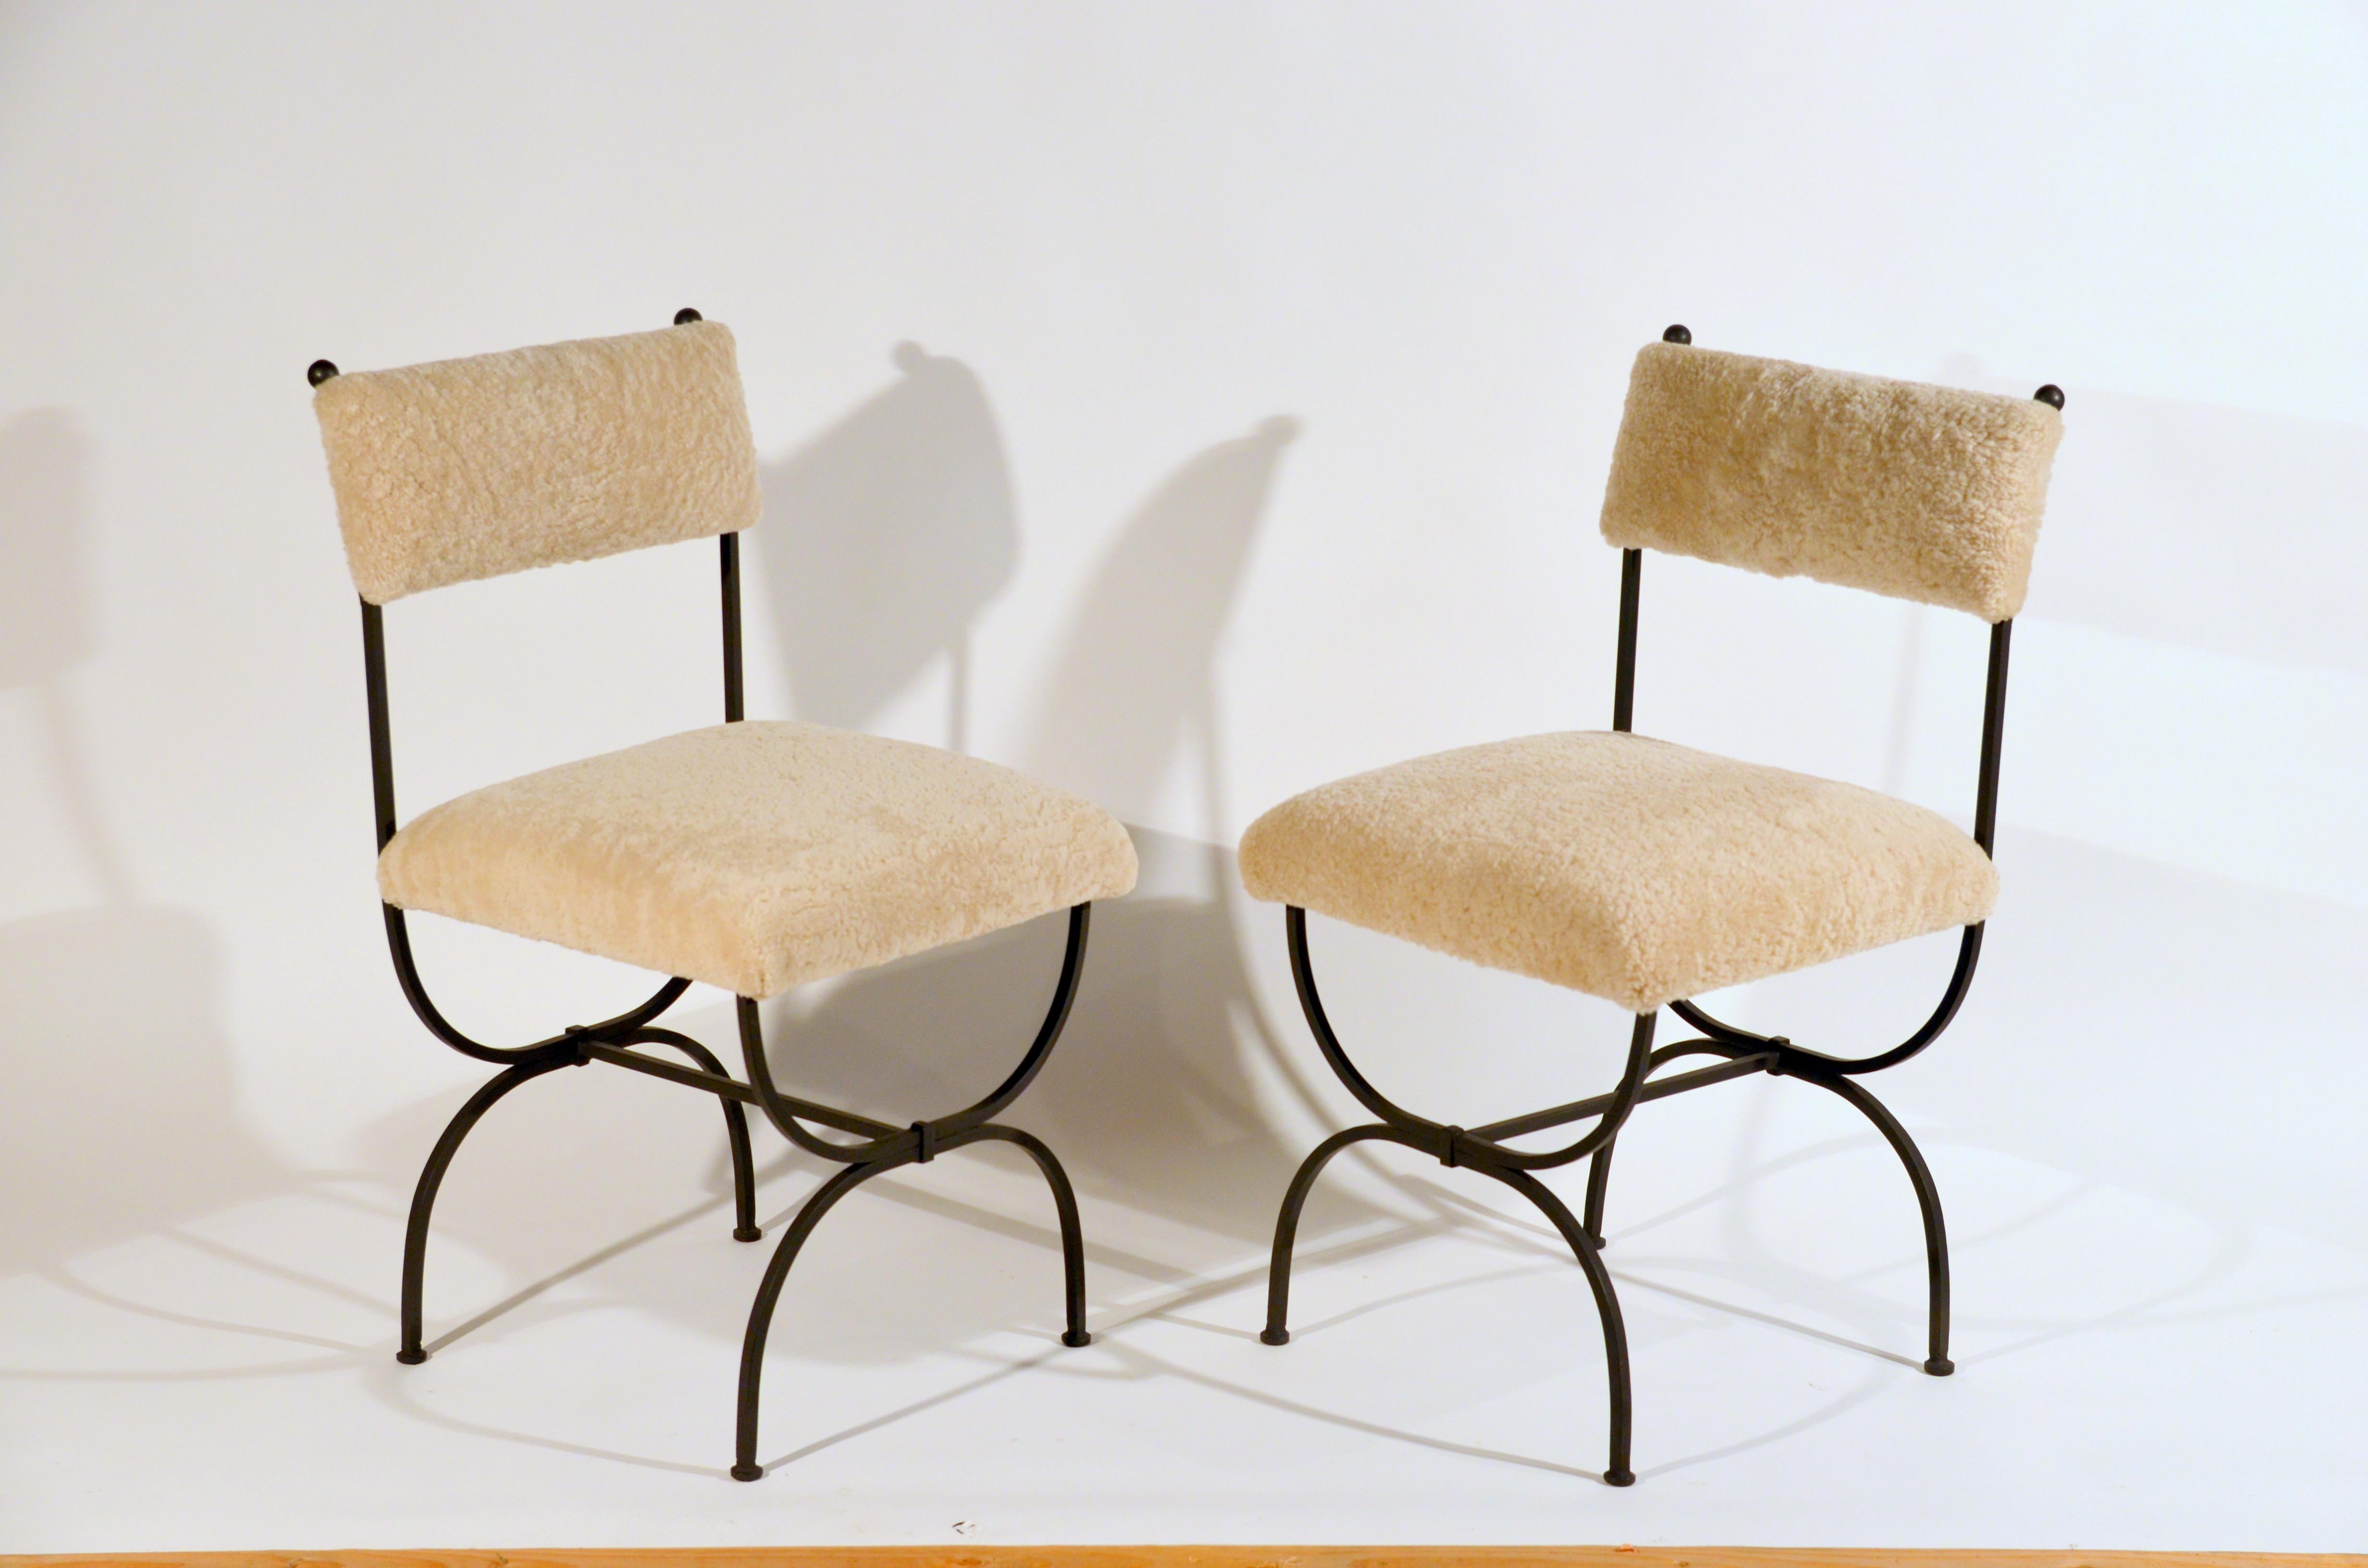 Pair of chic 'Arcade' wrought iron and shearling chairs by Design Frères.

Extraordinary pair of side chairs with white shearling upholstery. This unique upholstery treatment gives these chairs a very luxurious feel. The beautifully proportioned